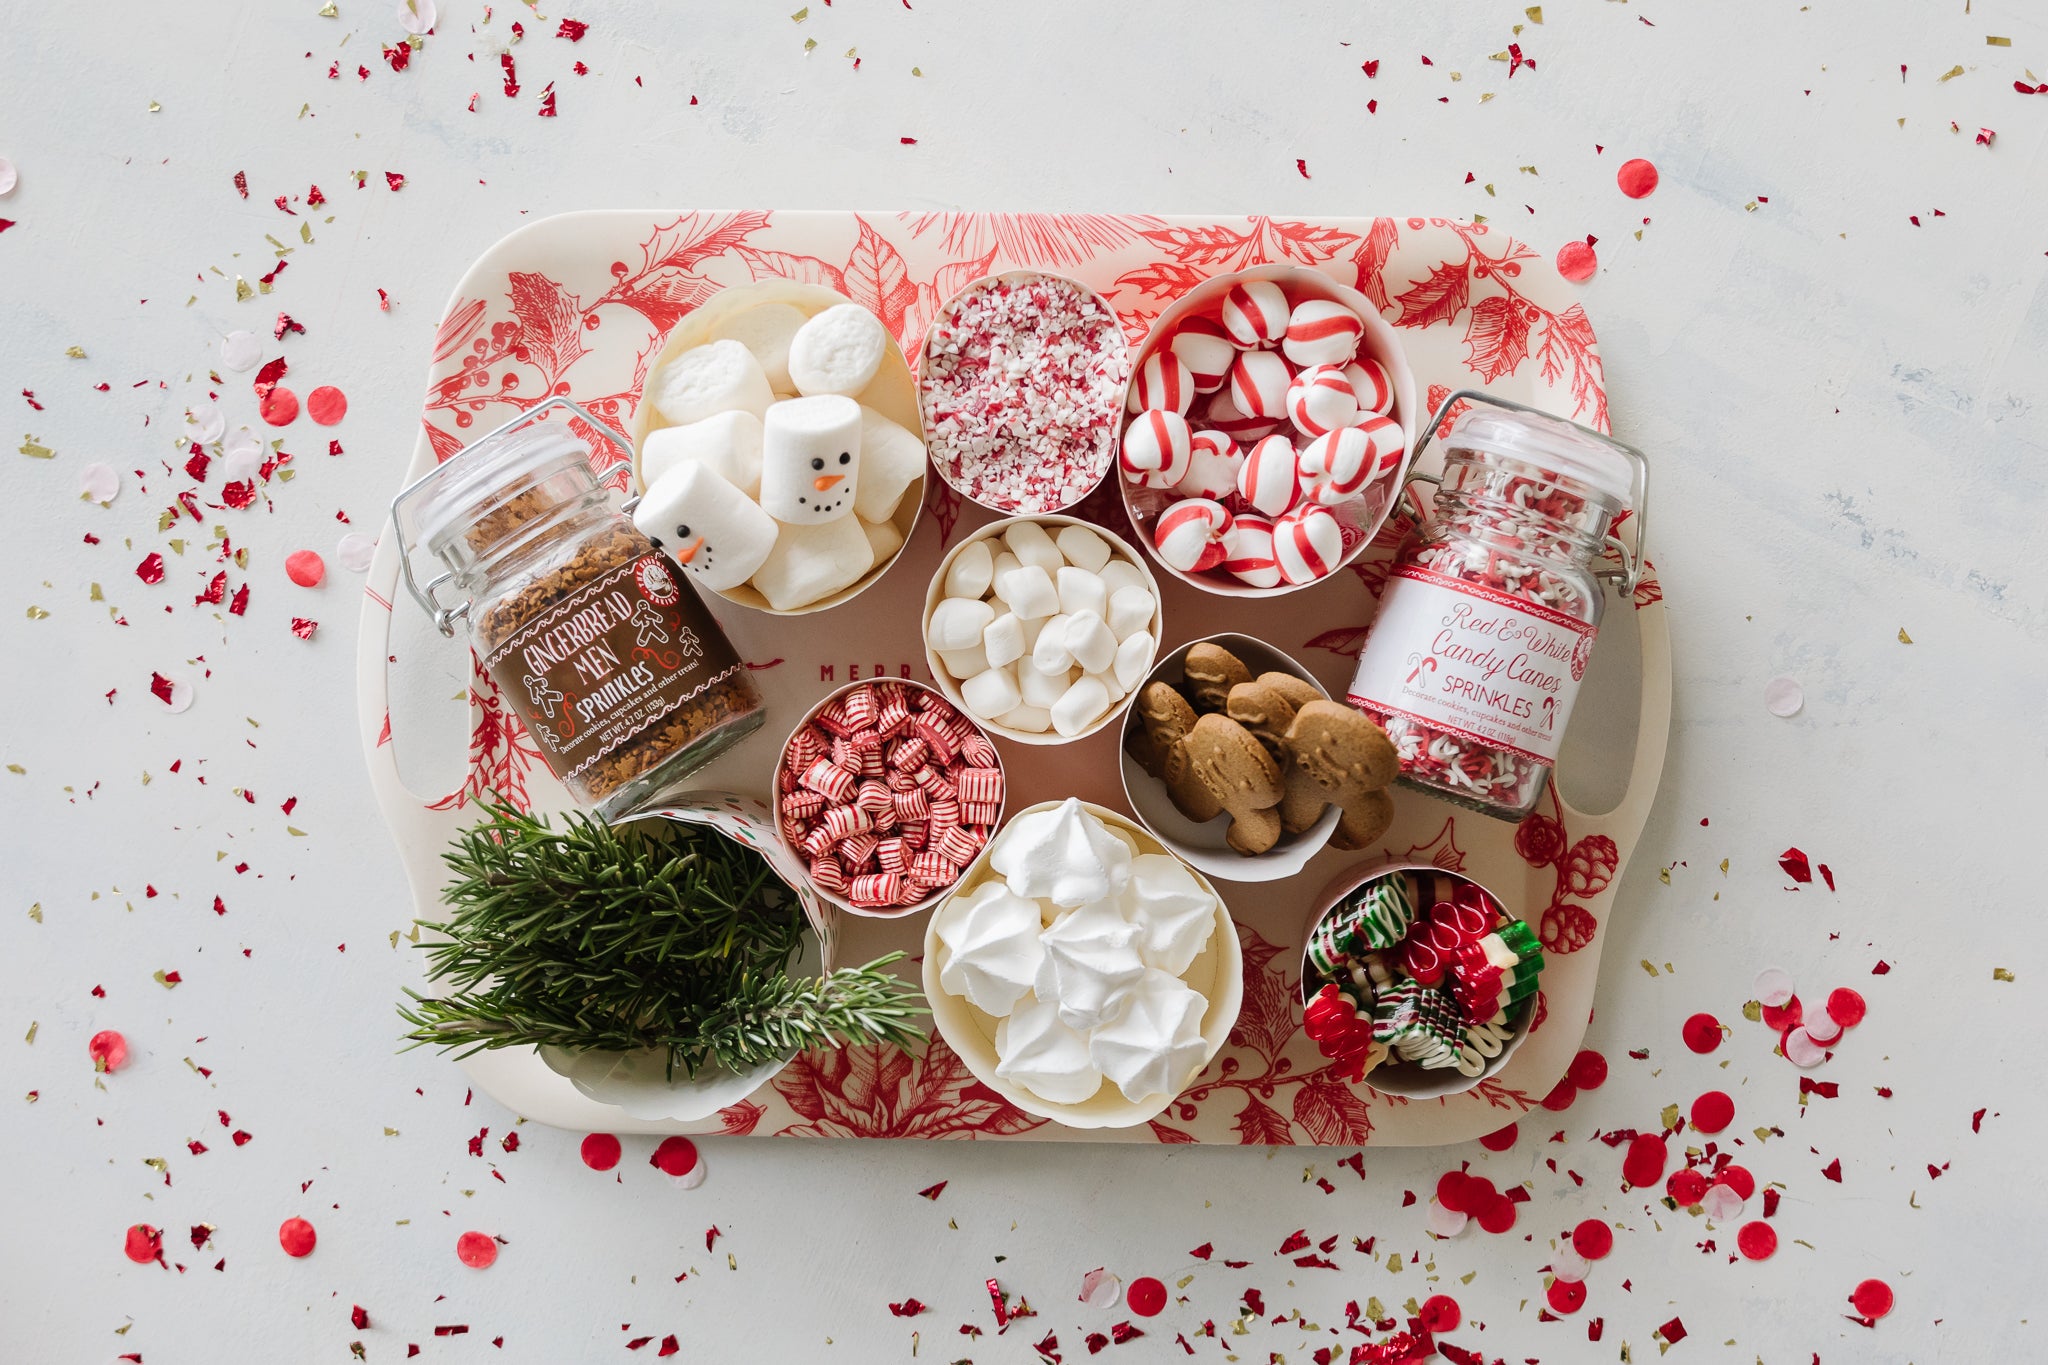 Hot chocolate toppings displayed on a Christmas tray.